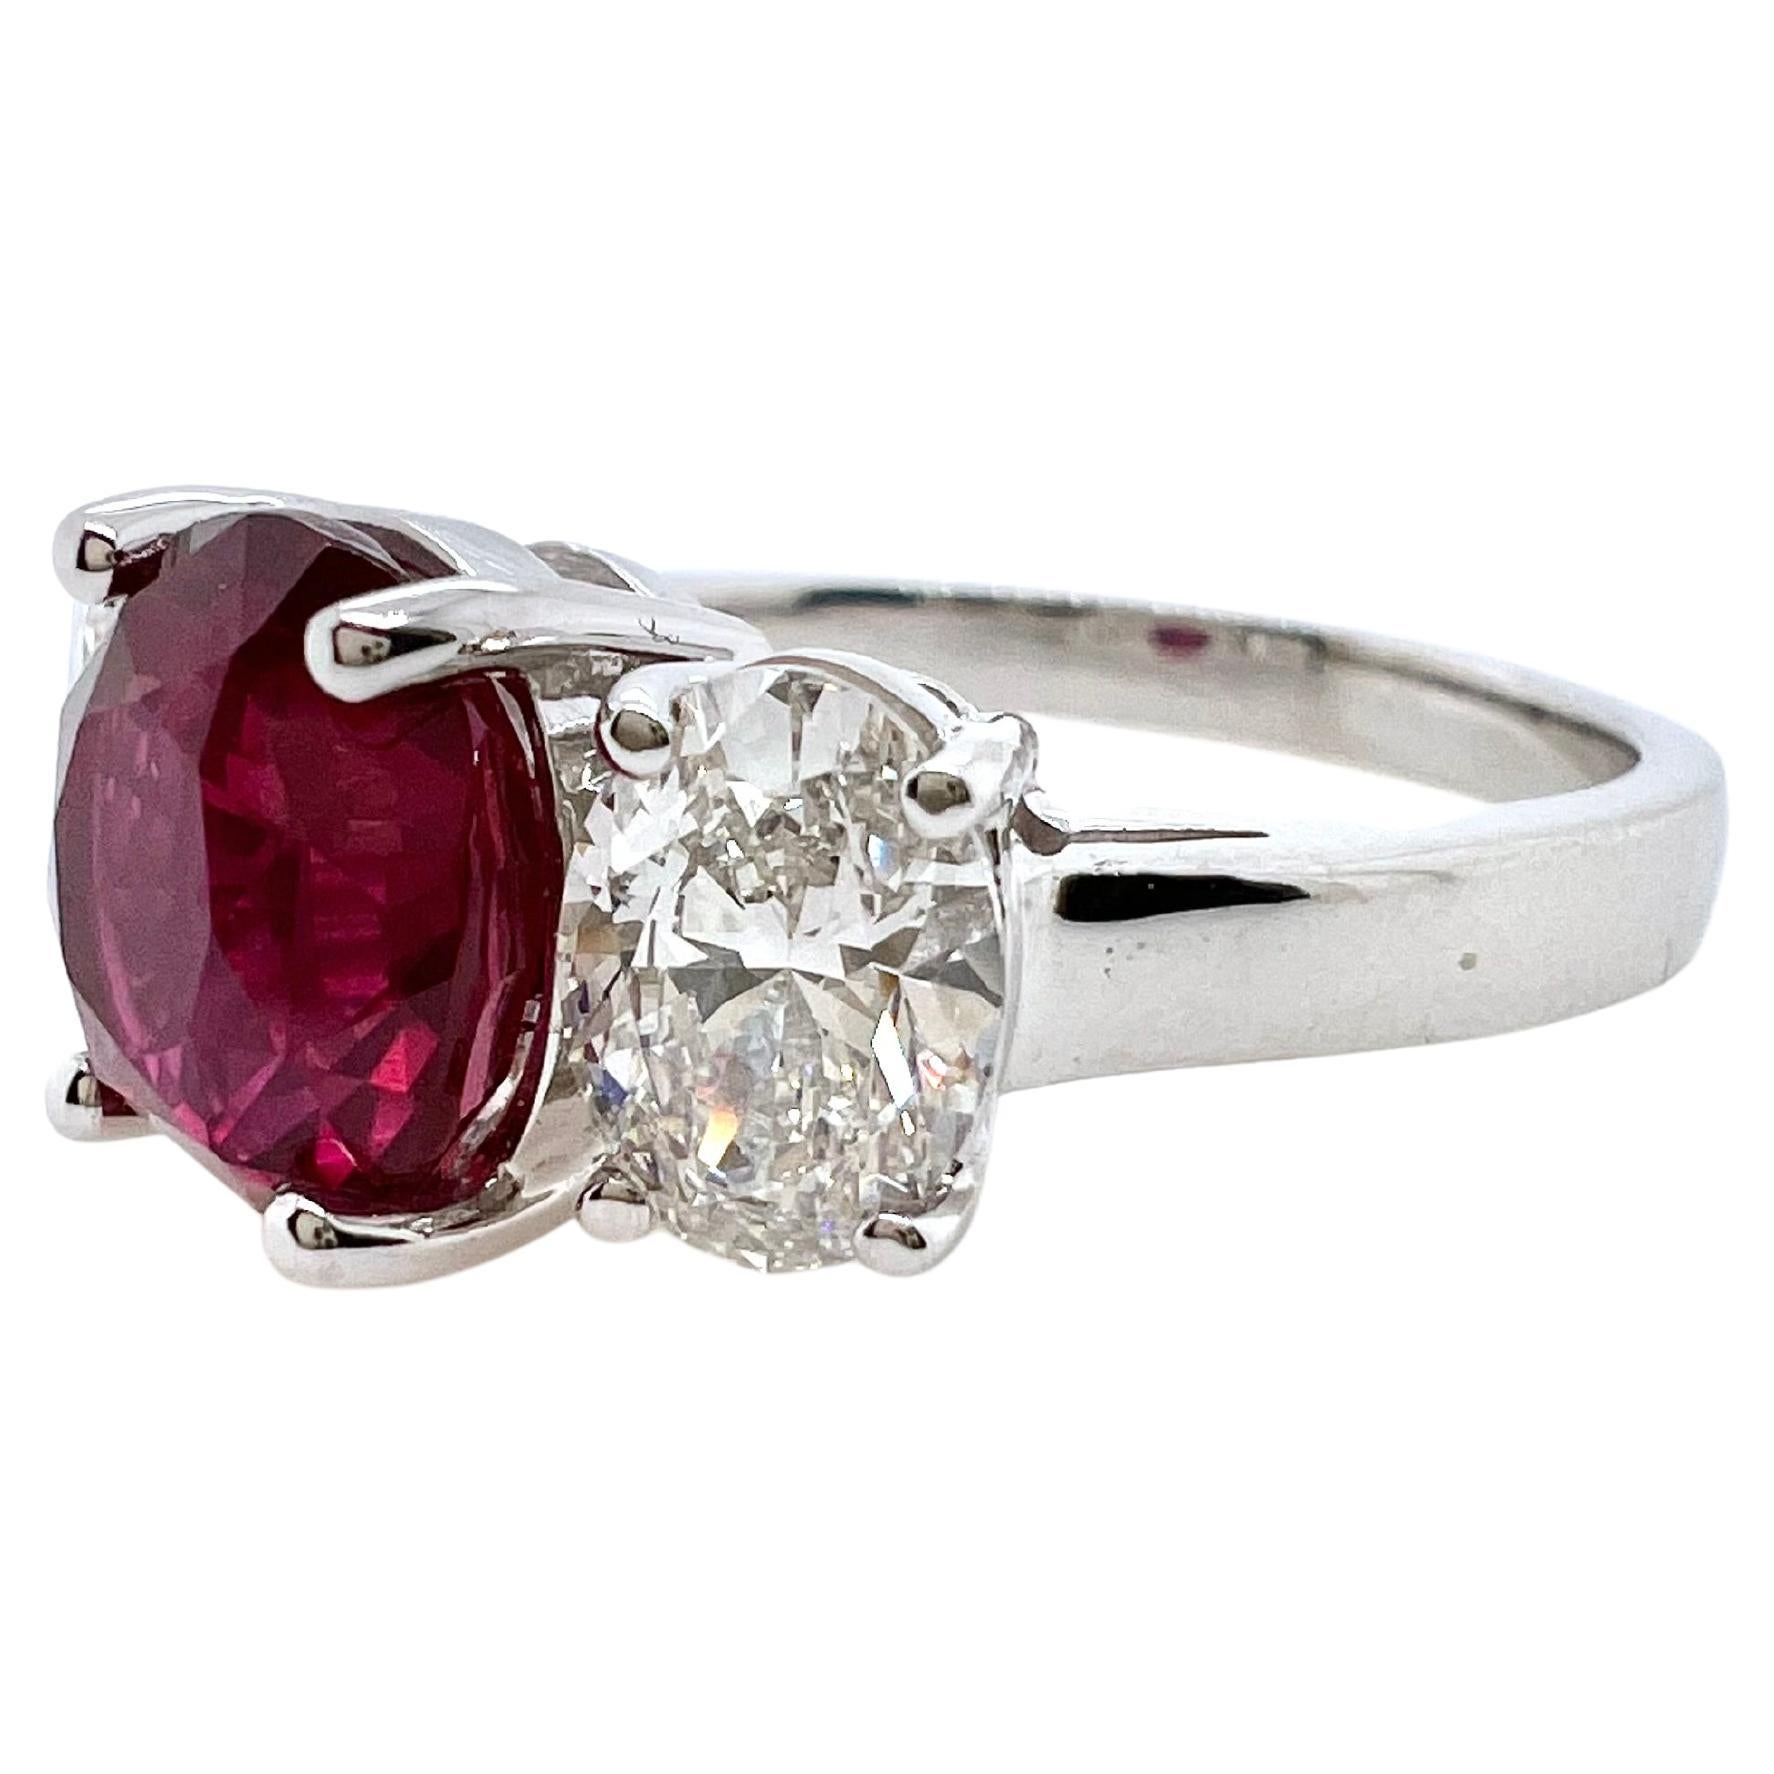 This classic three stones ring will be cherished for generations to come.  The center ruby is GIA certified, unheated 3.09 cts oval cut. It is accompanied by two oval diamonds, both GIA certified, F color, VS1 and VS2 clarity.  The gorgeous ruby has